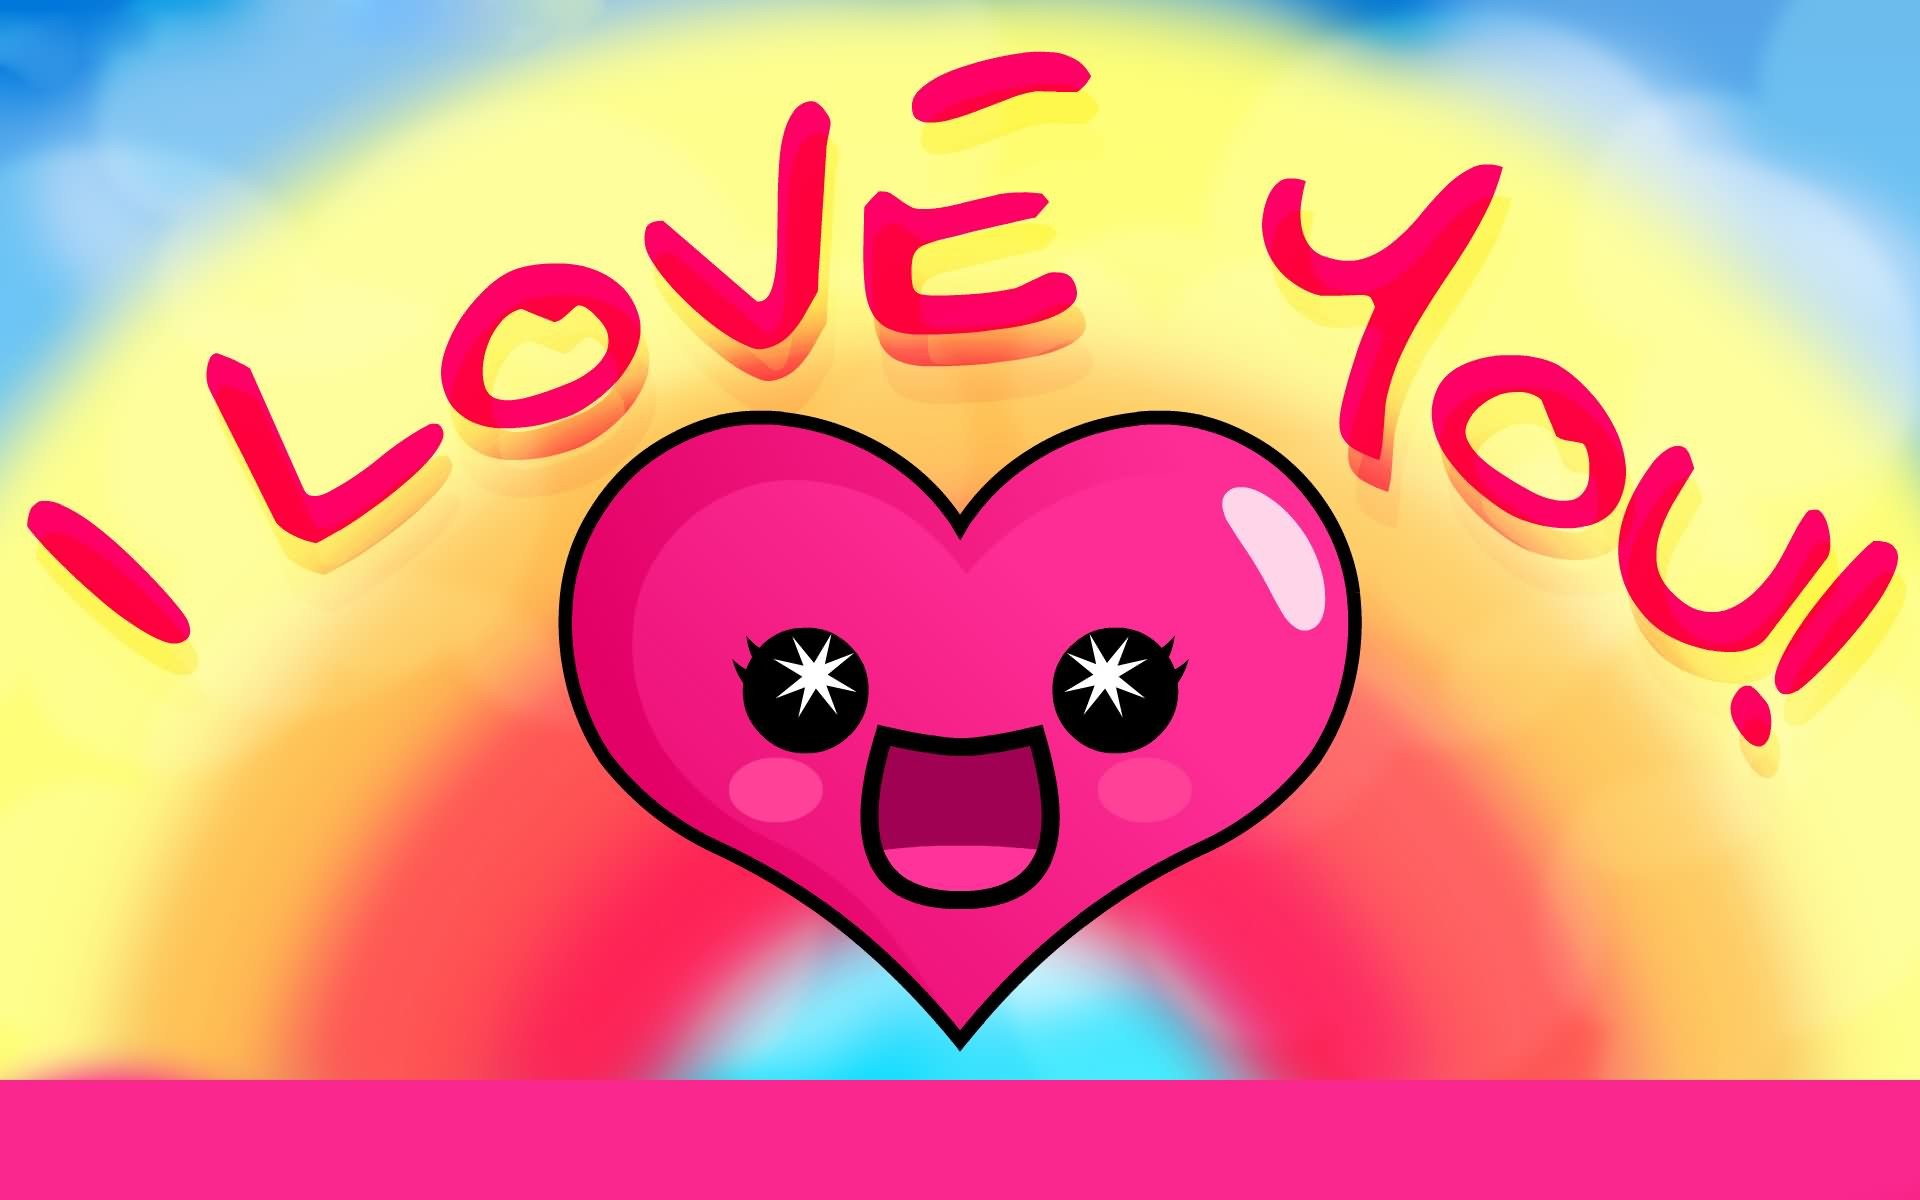 I Love You - Love You So Much Friend , HD Wallpaper & Backgrounds